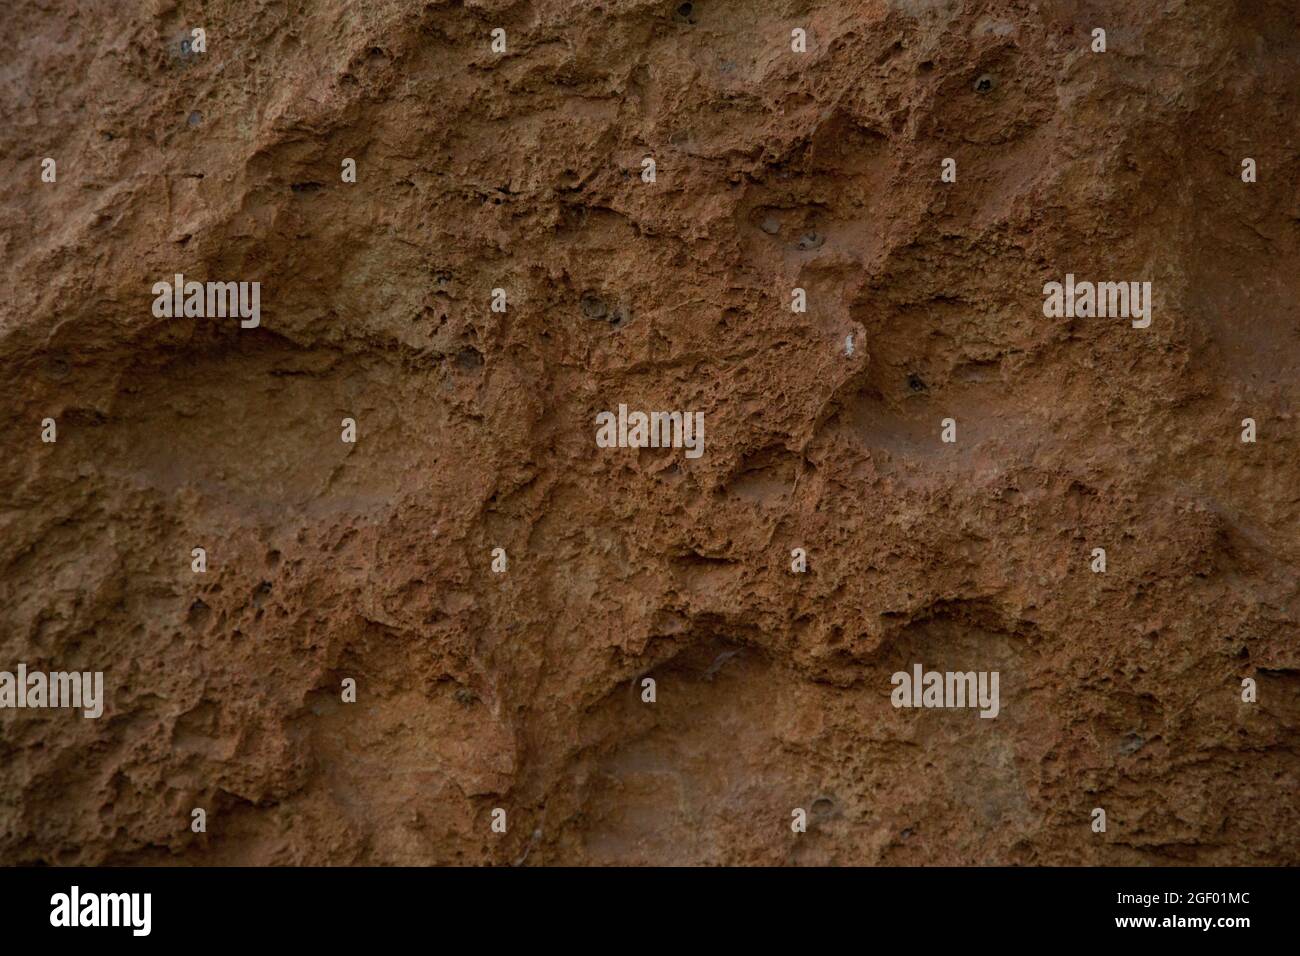 Stone texture with various smooth and porous shapes Stock Photo